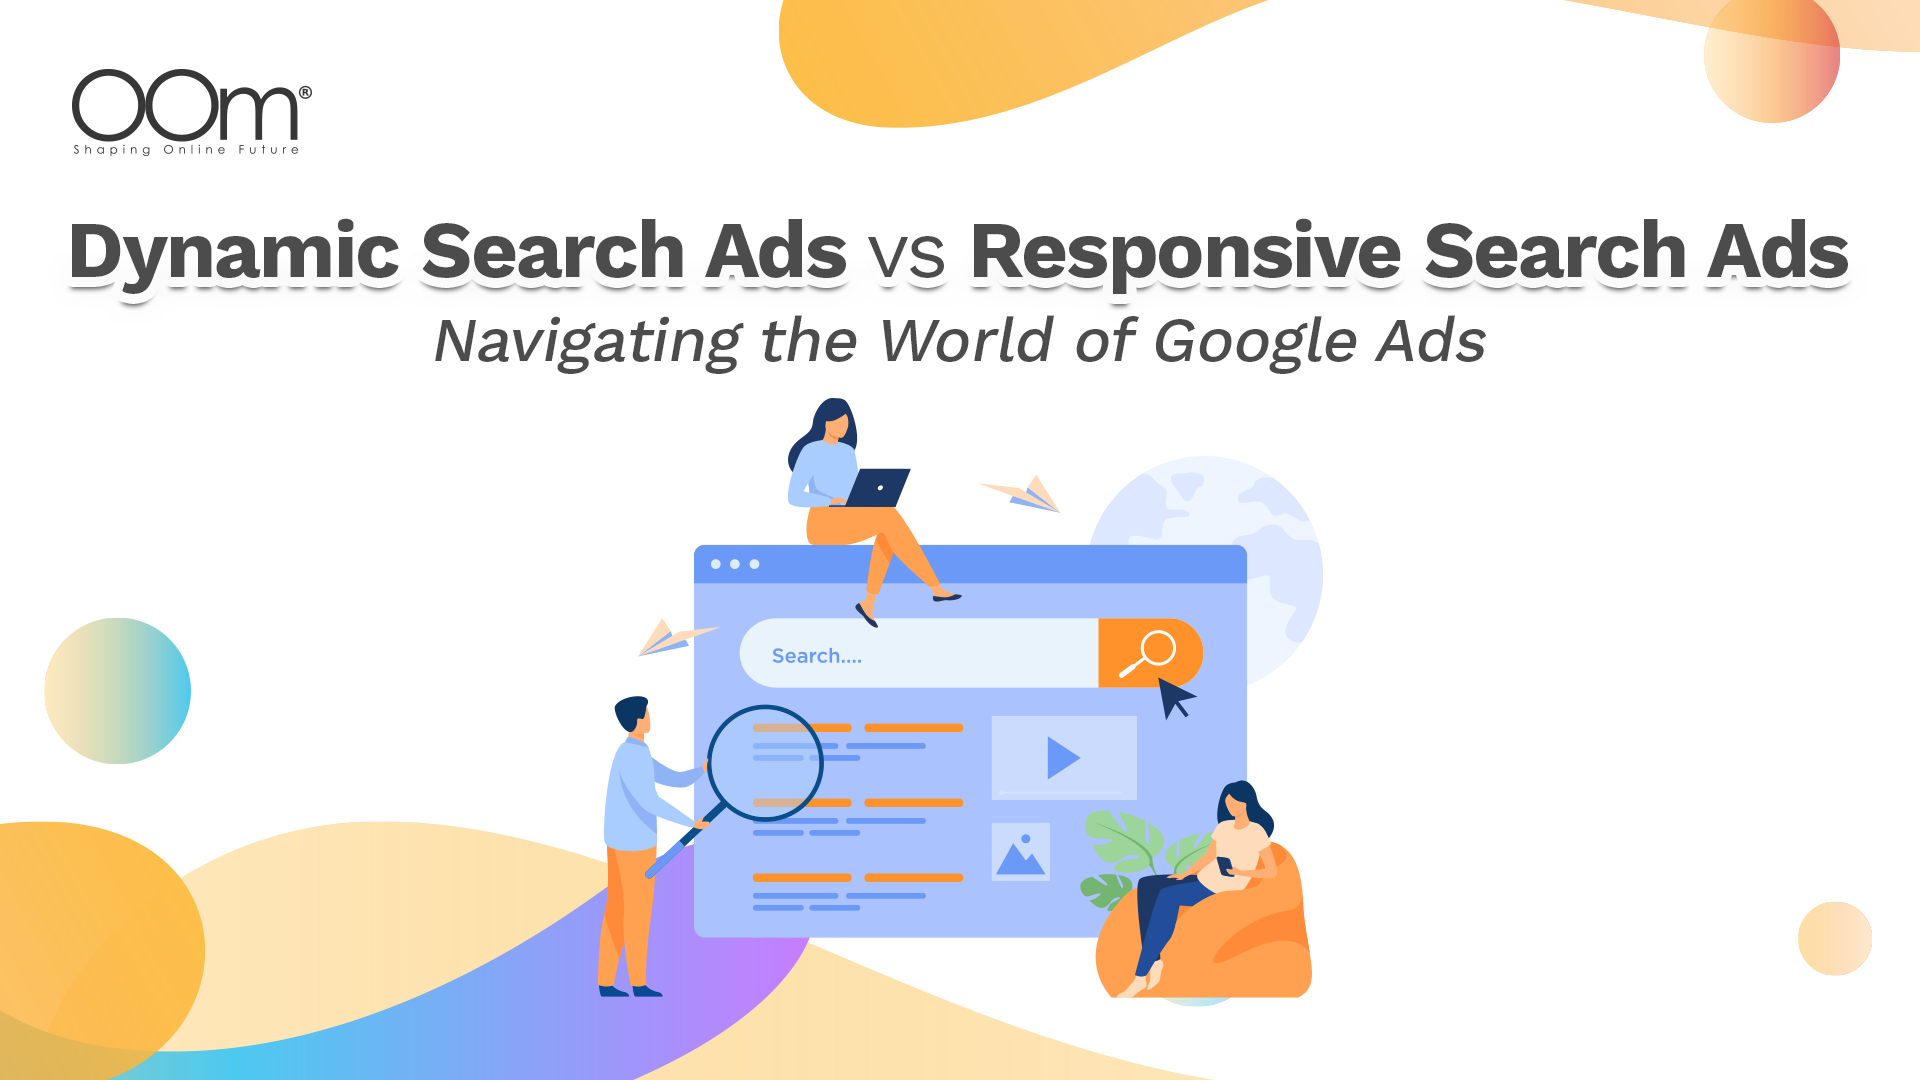 Dynamic Search Ads VS Responsive Search Ads